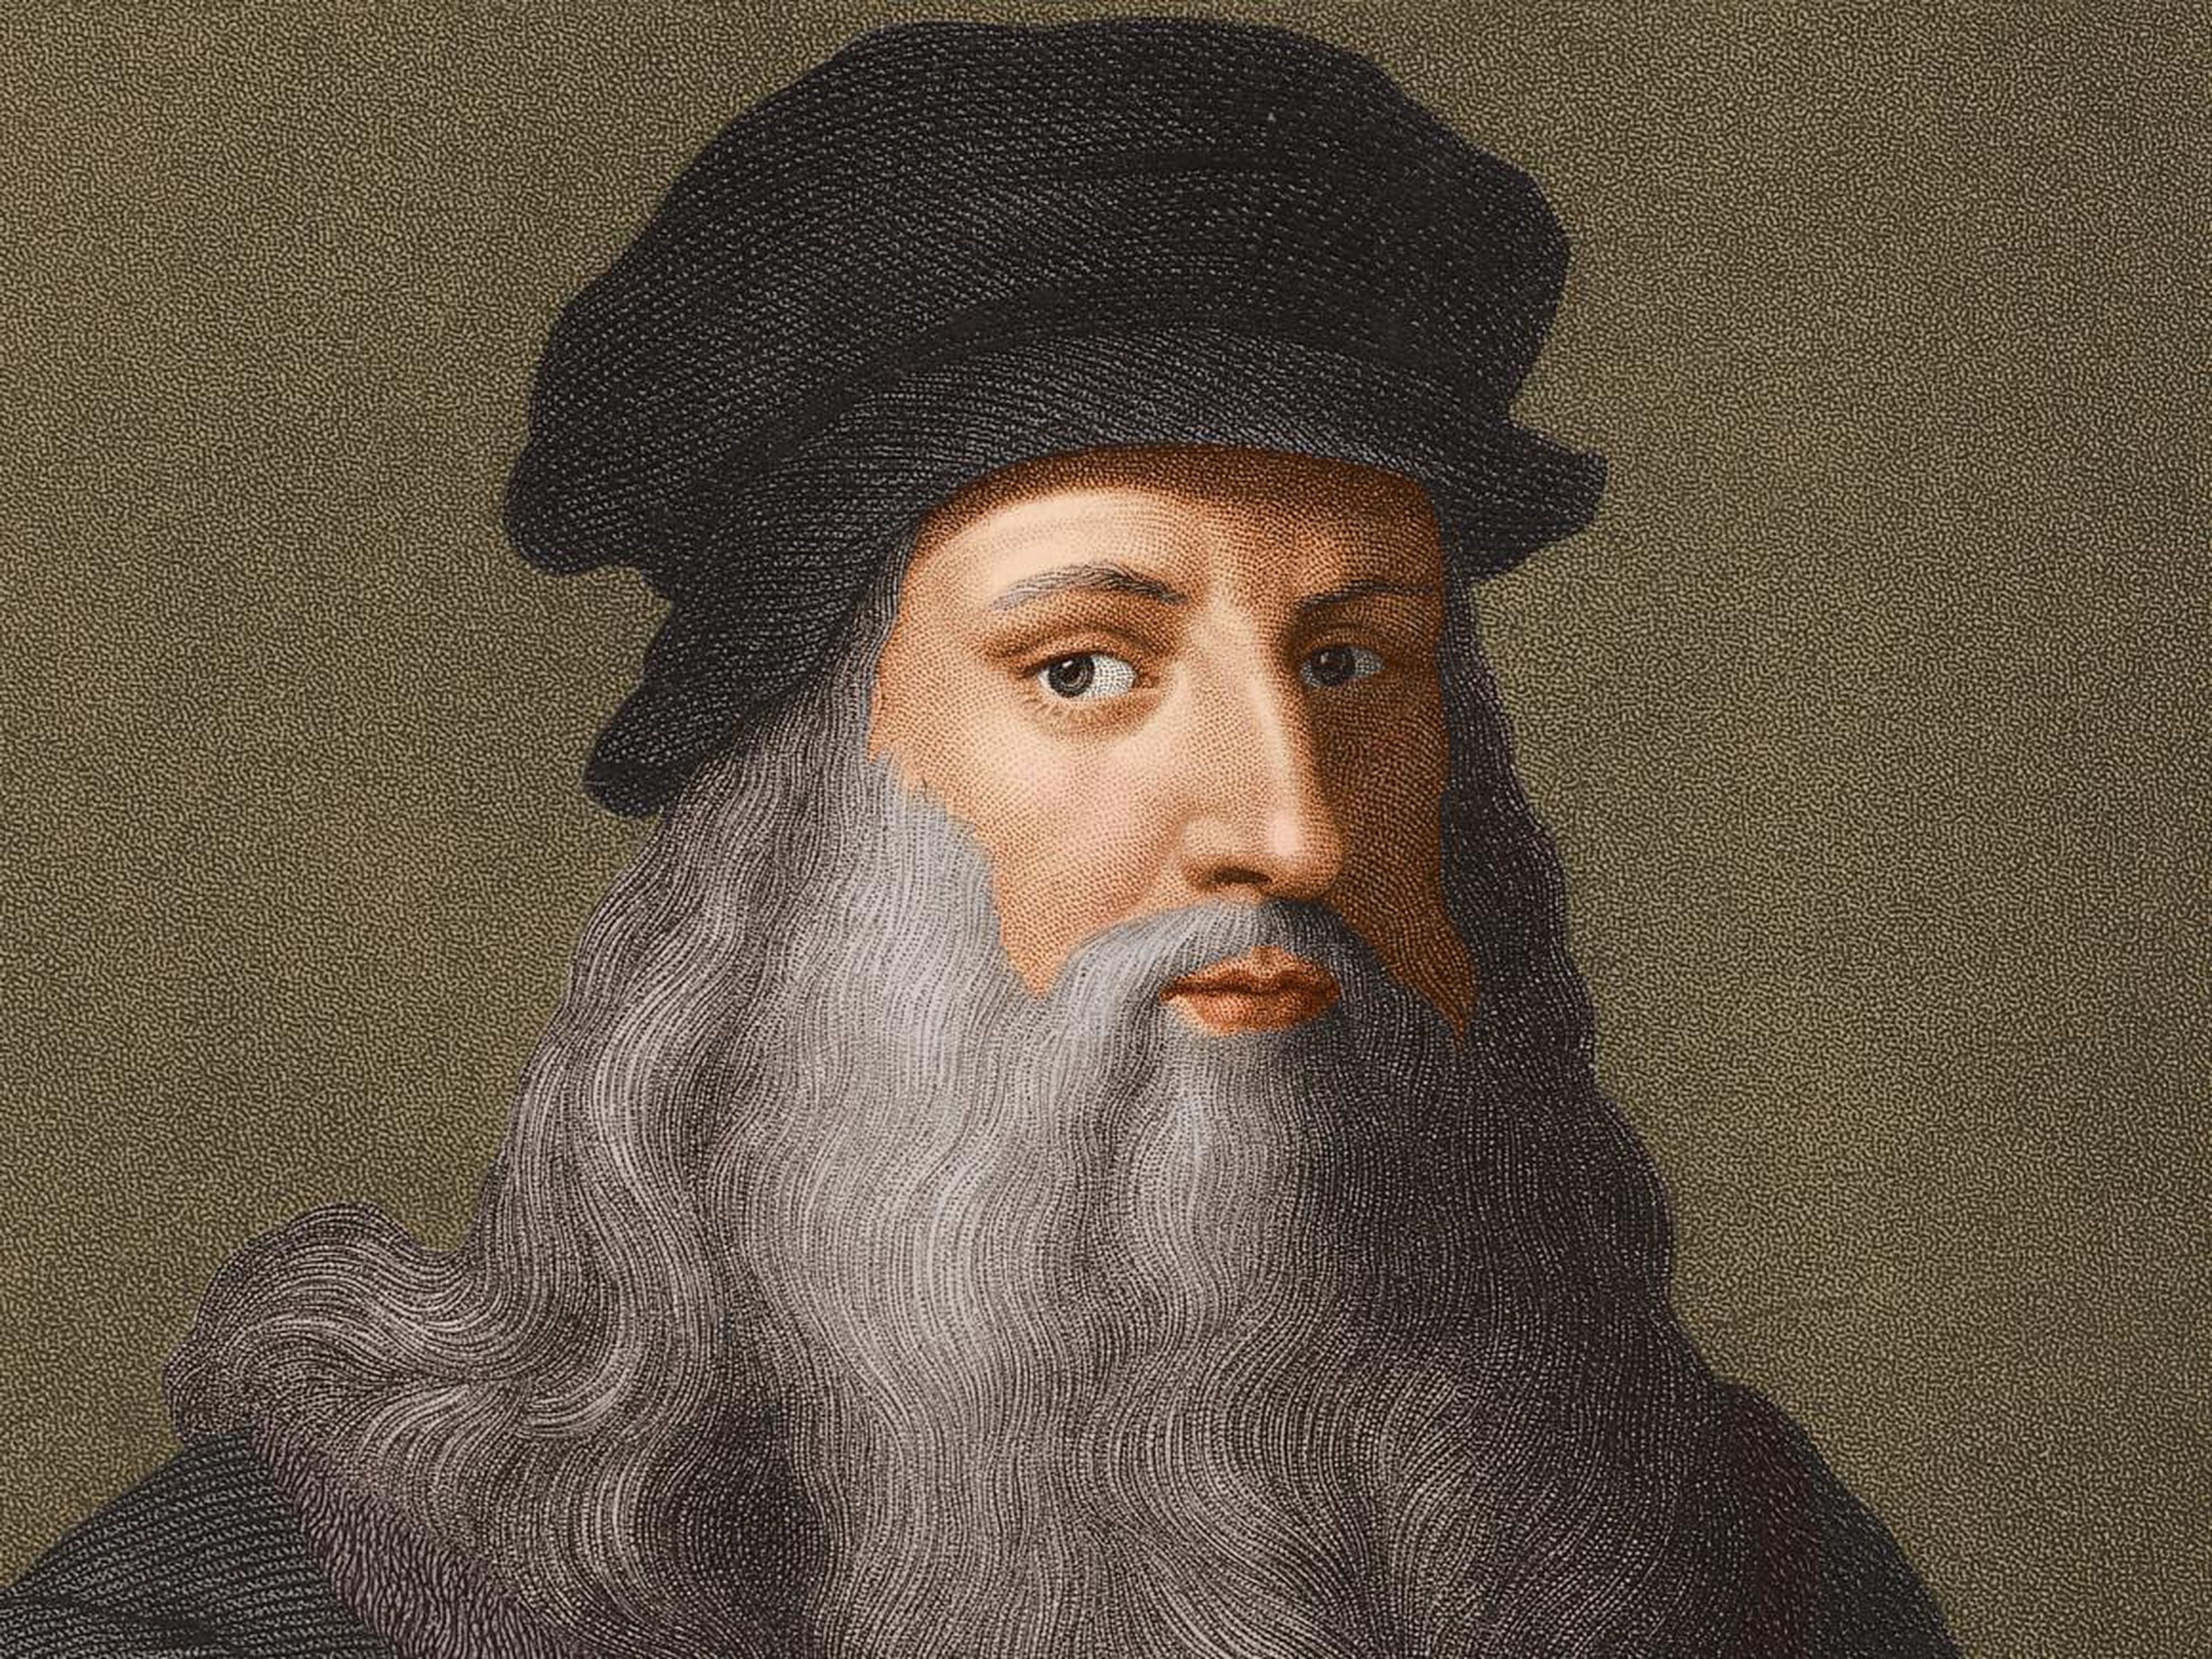 Leonardo da Vinci made several predictions about technology and the natural world that were eventually proven right.